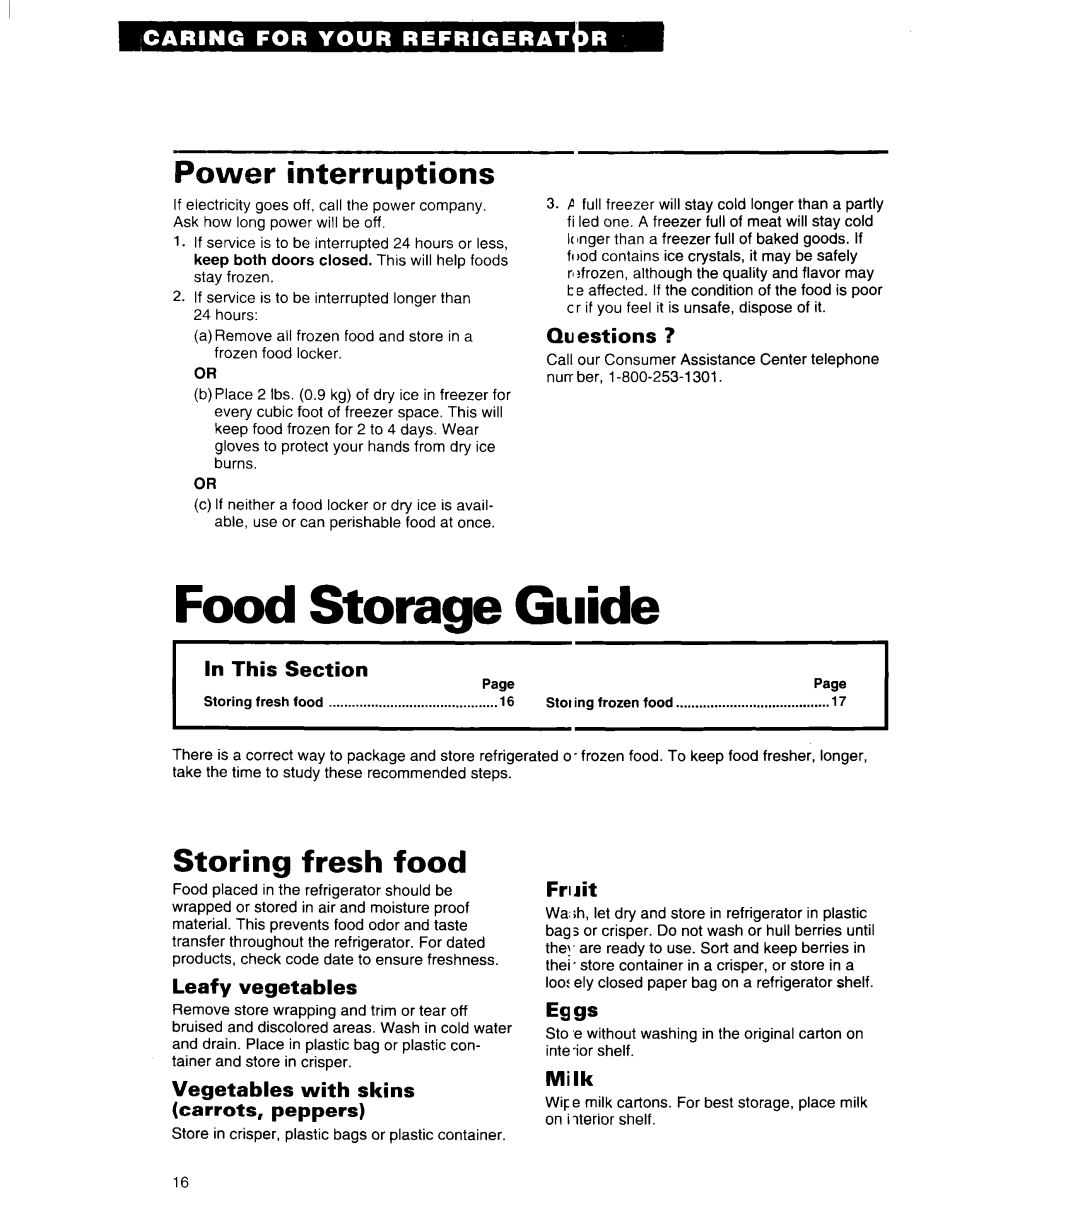 Whirlpool ET18LK Food Storage Guide, Power interruptions, Storing fresh food, In This, Section, Leafy vegetables, Frlrit 